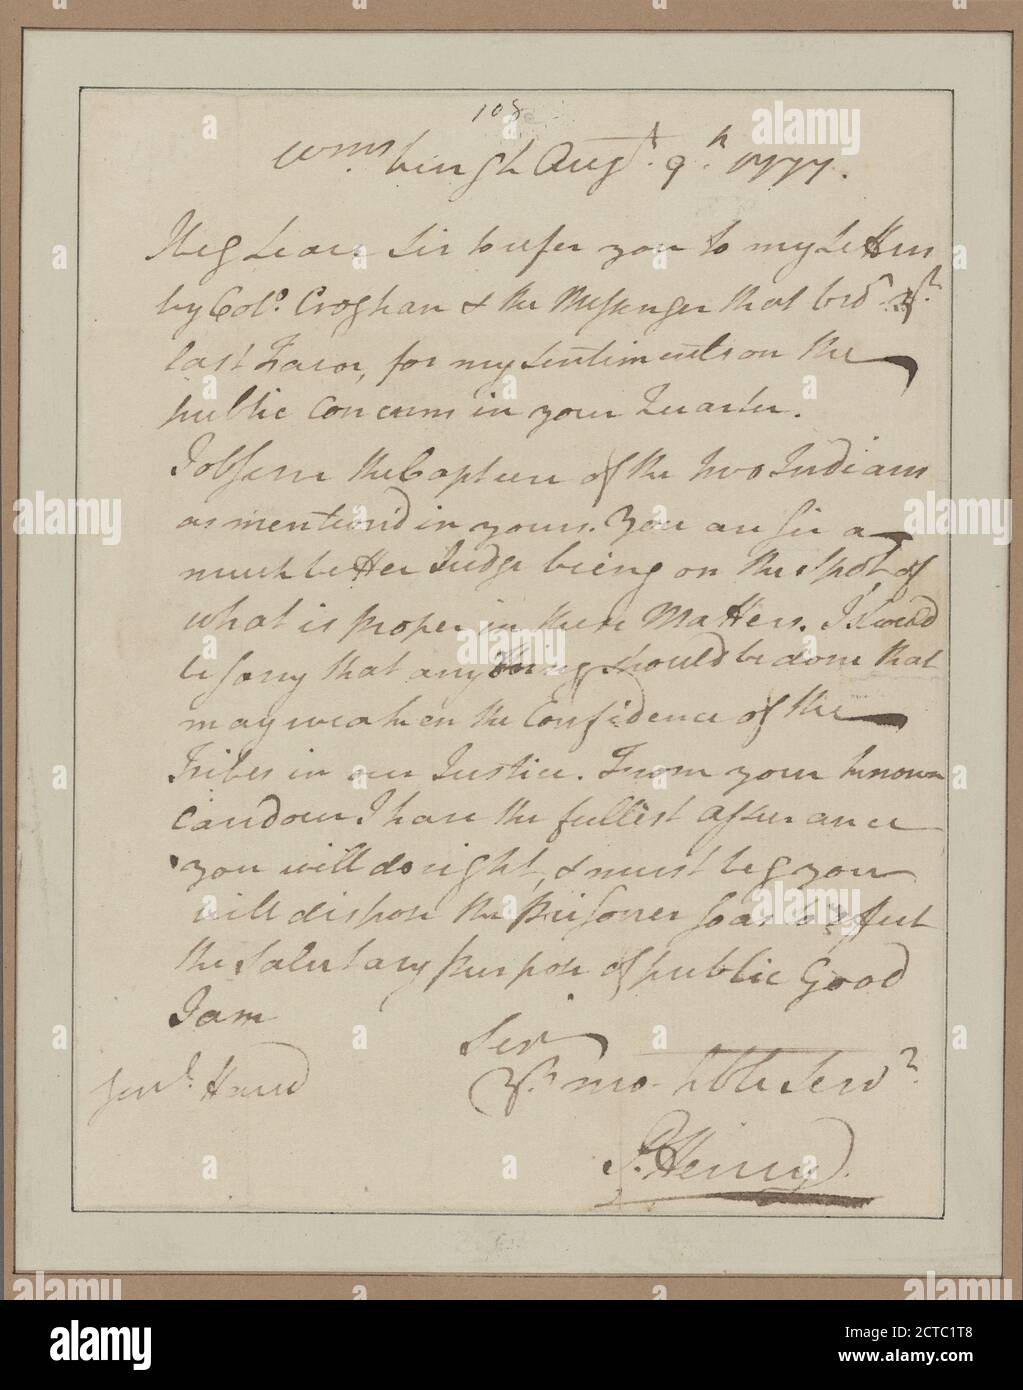 Letter to Gen. Edward Hand, Pittsburg, text, Documents, 1777, Henry ...